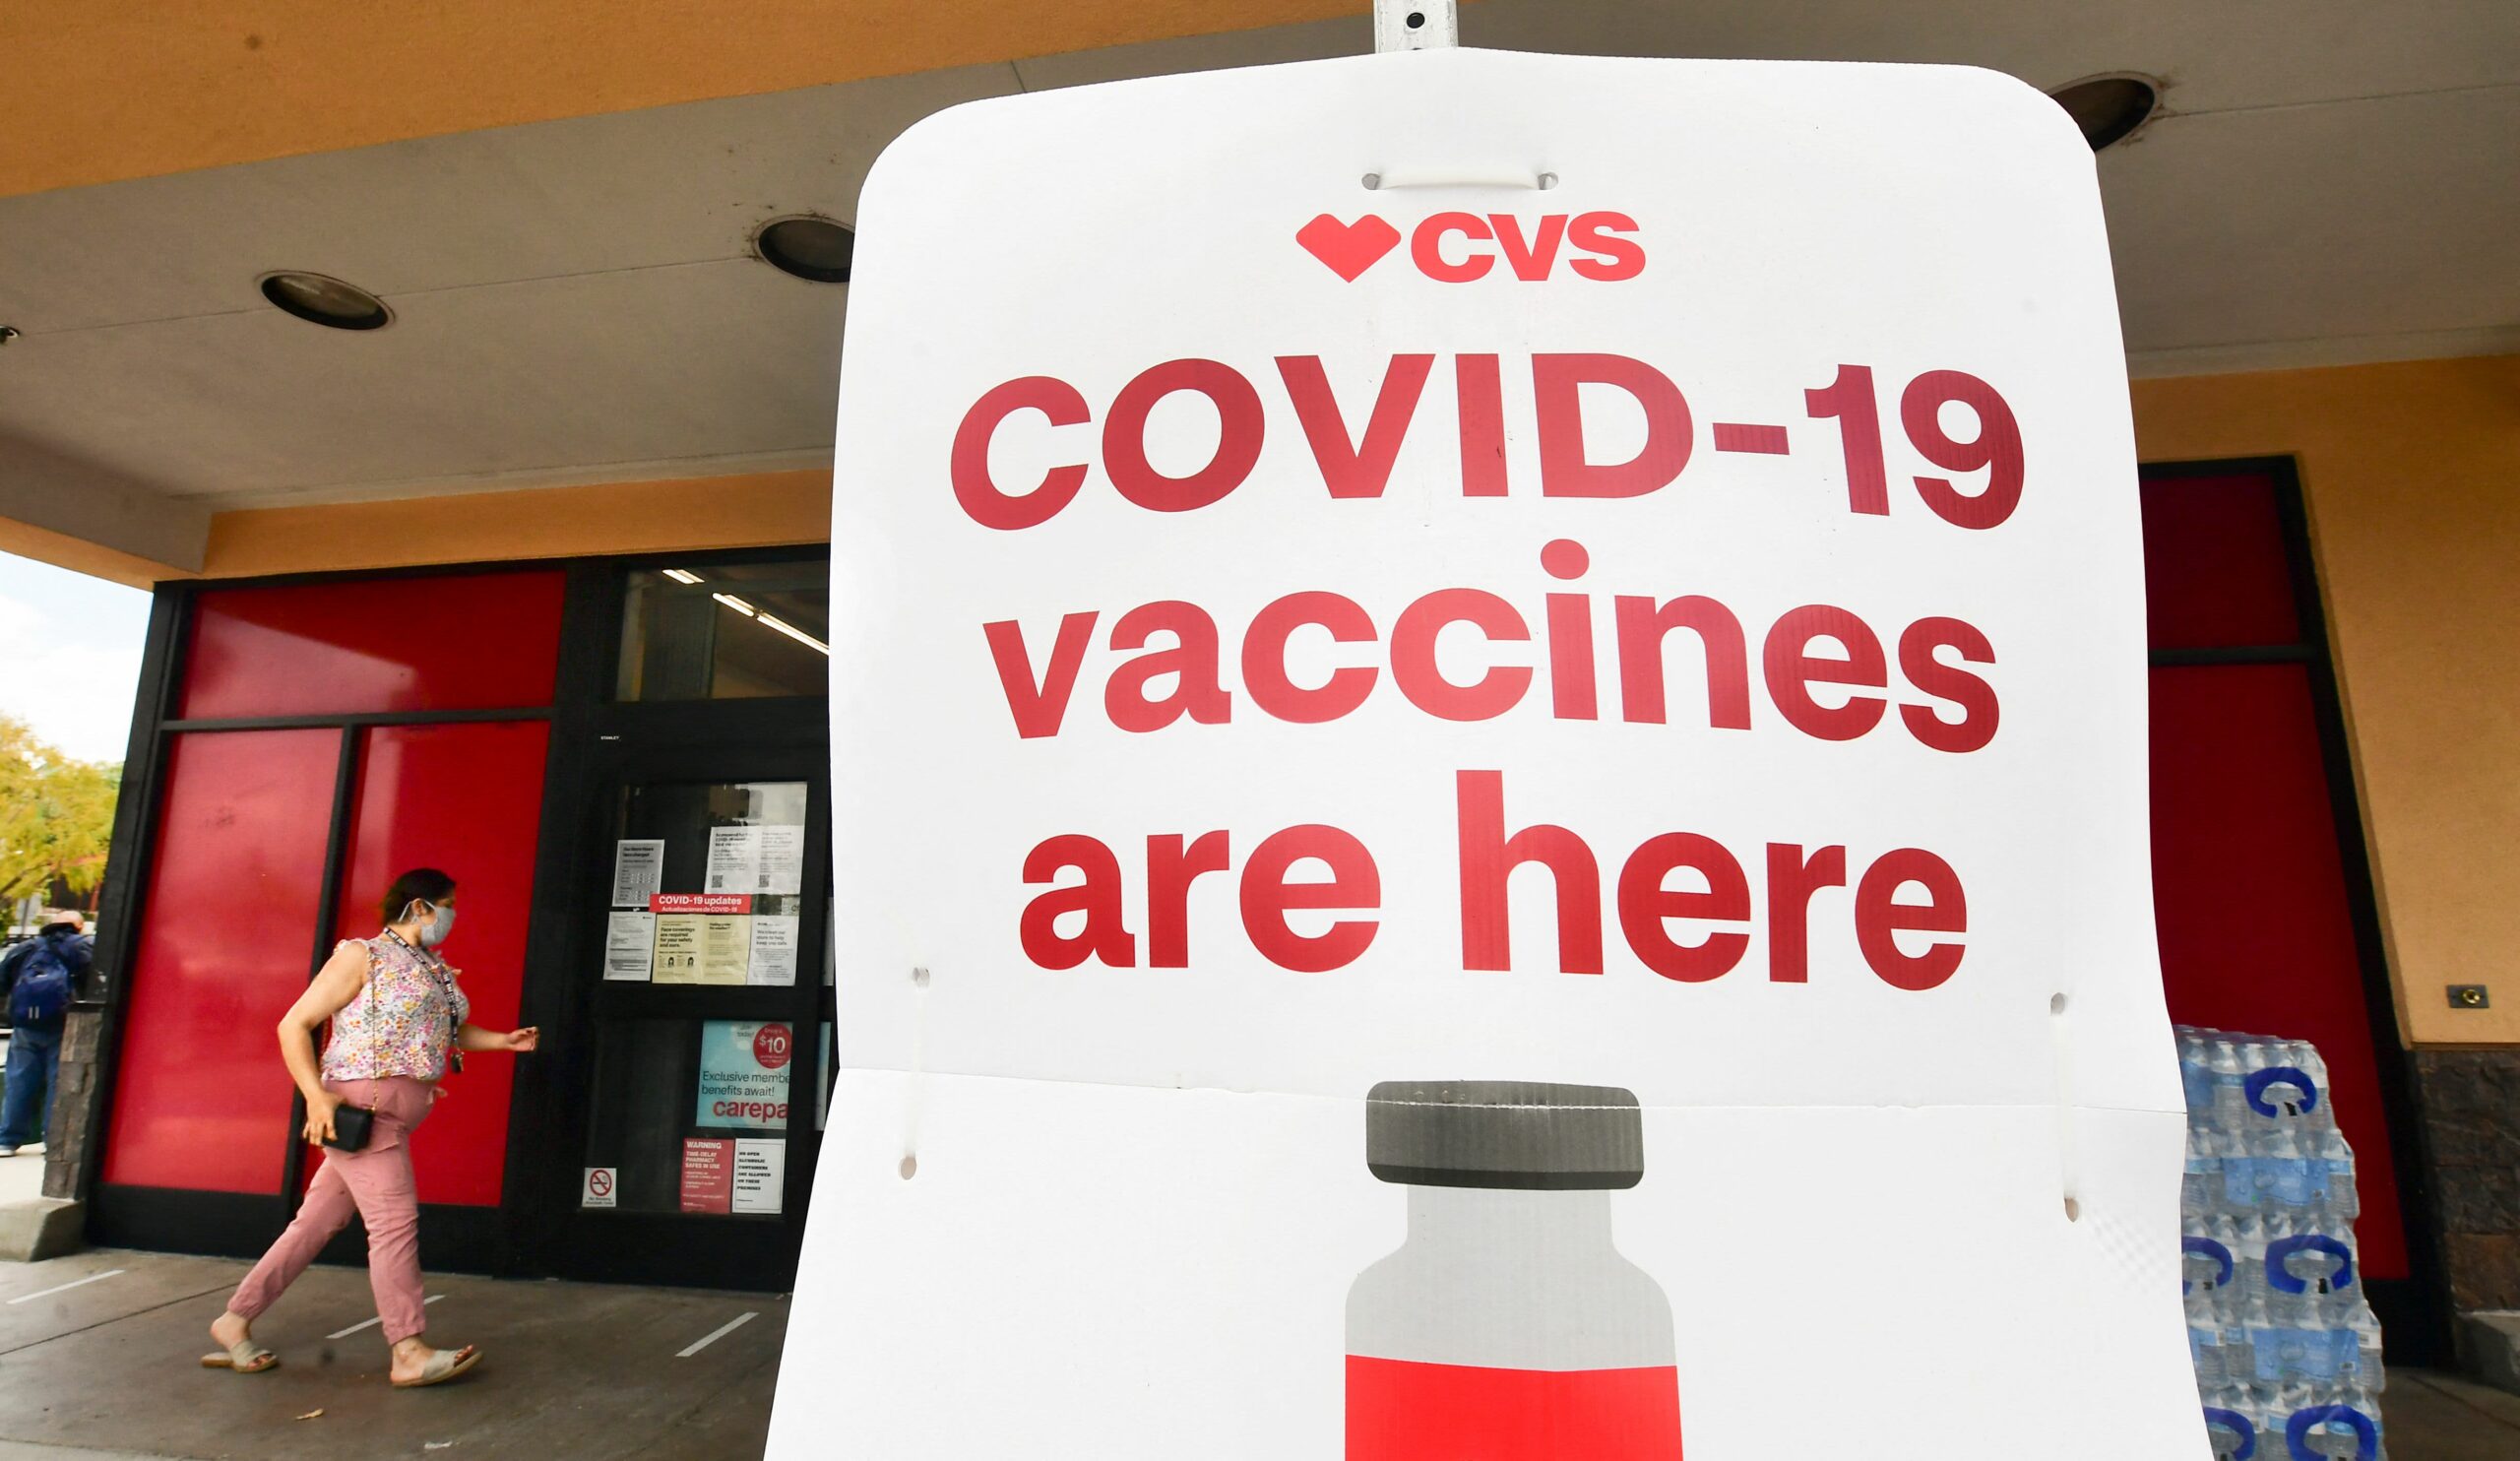 Walgreens, CVS and Ceremony Help supply same-day Covid vaccines as tempo slows